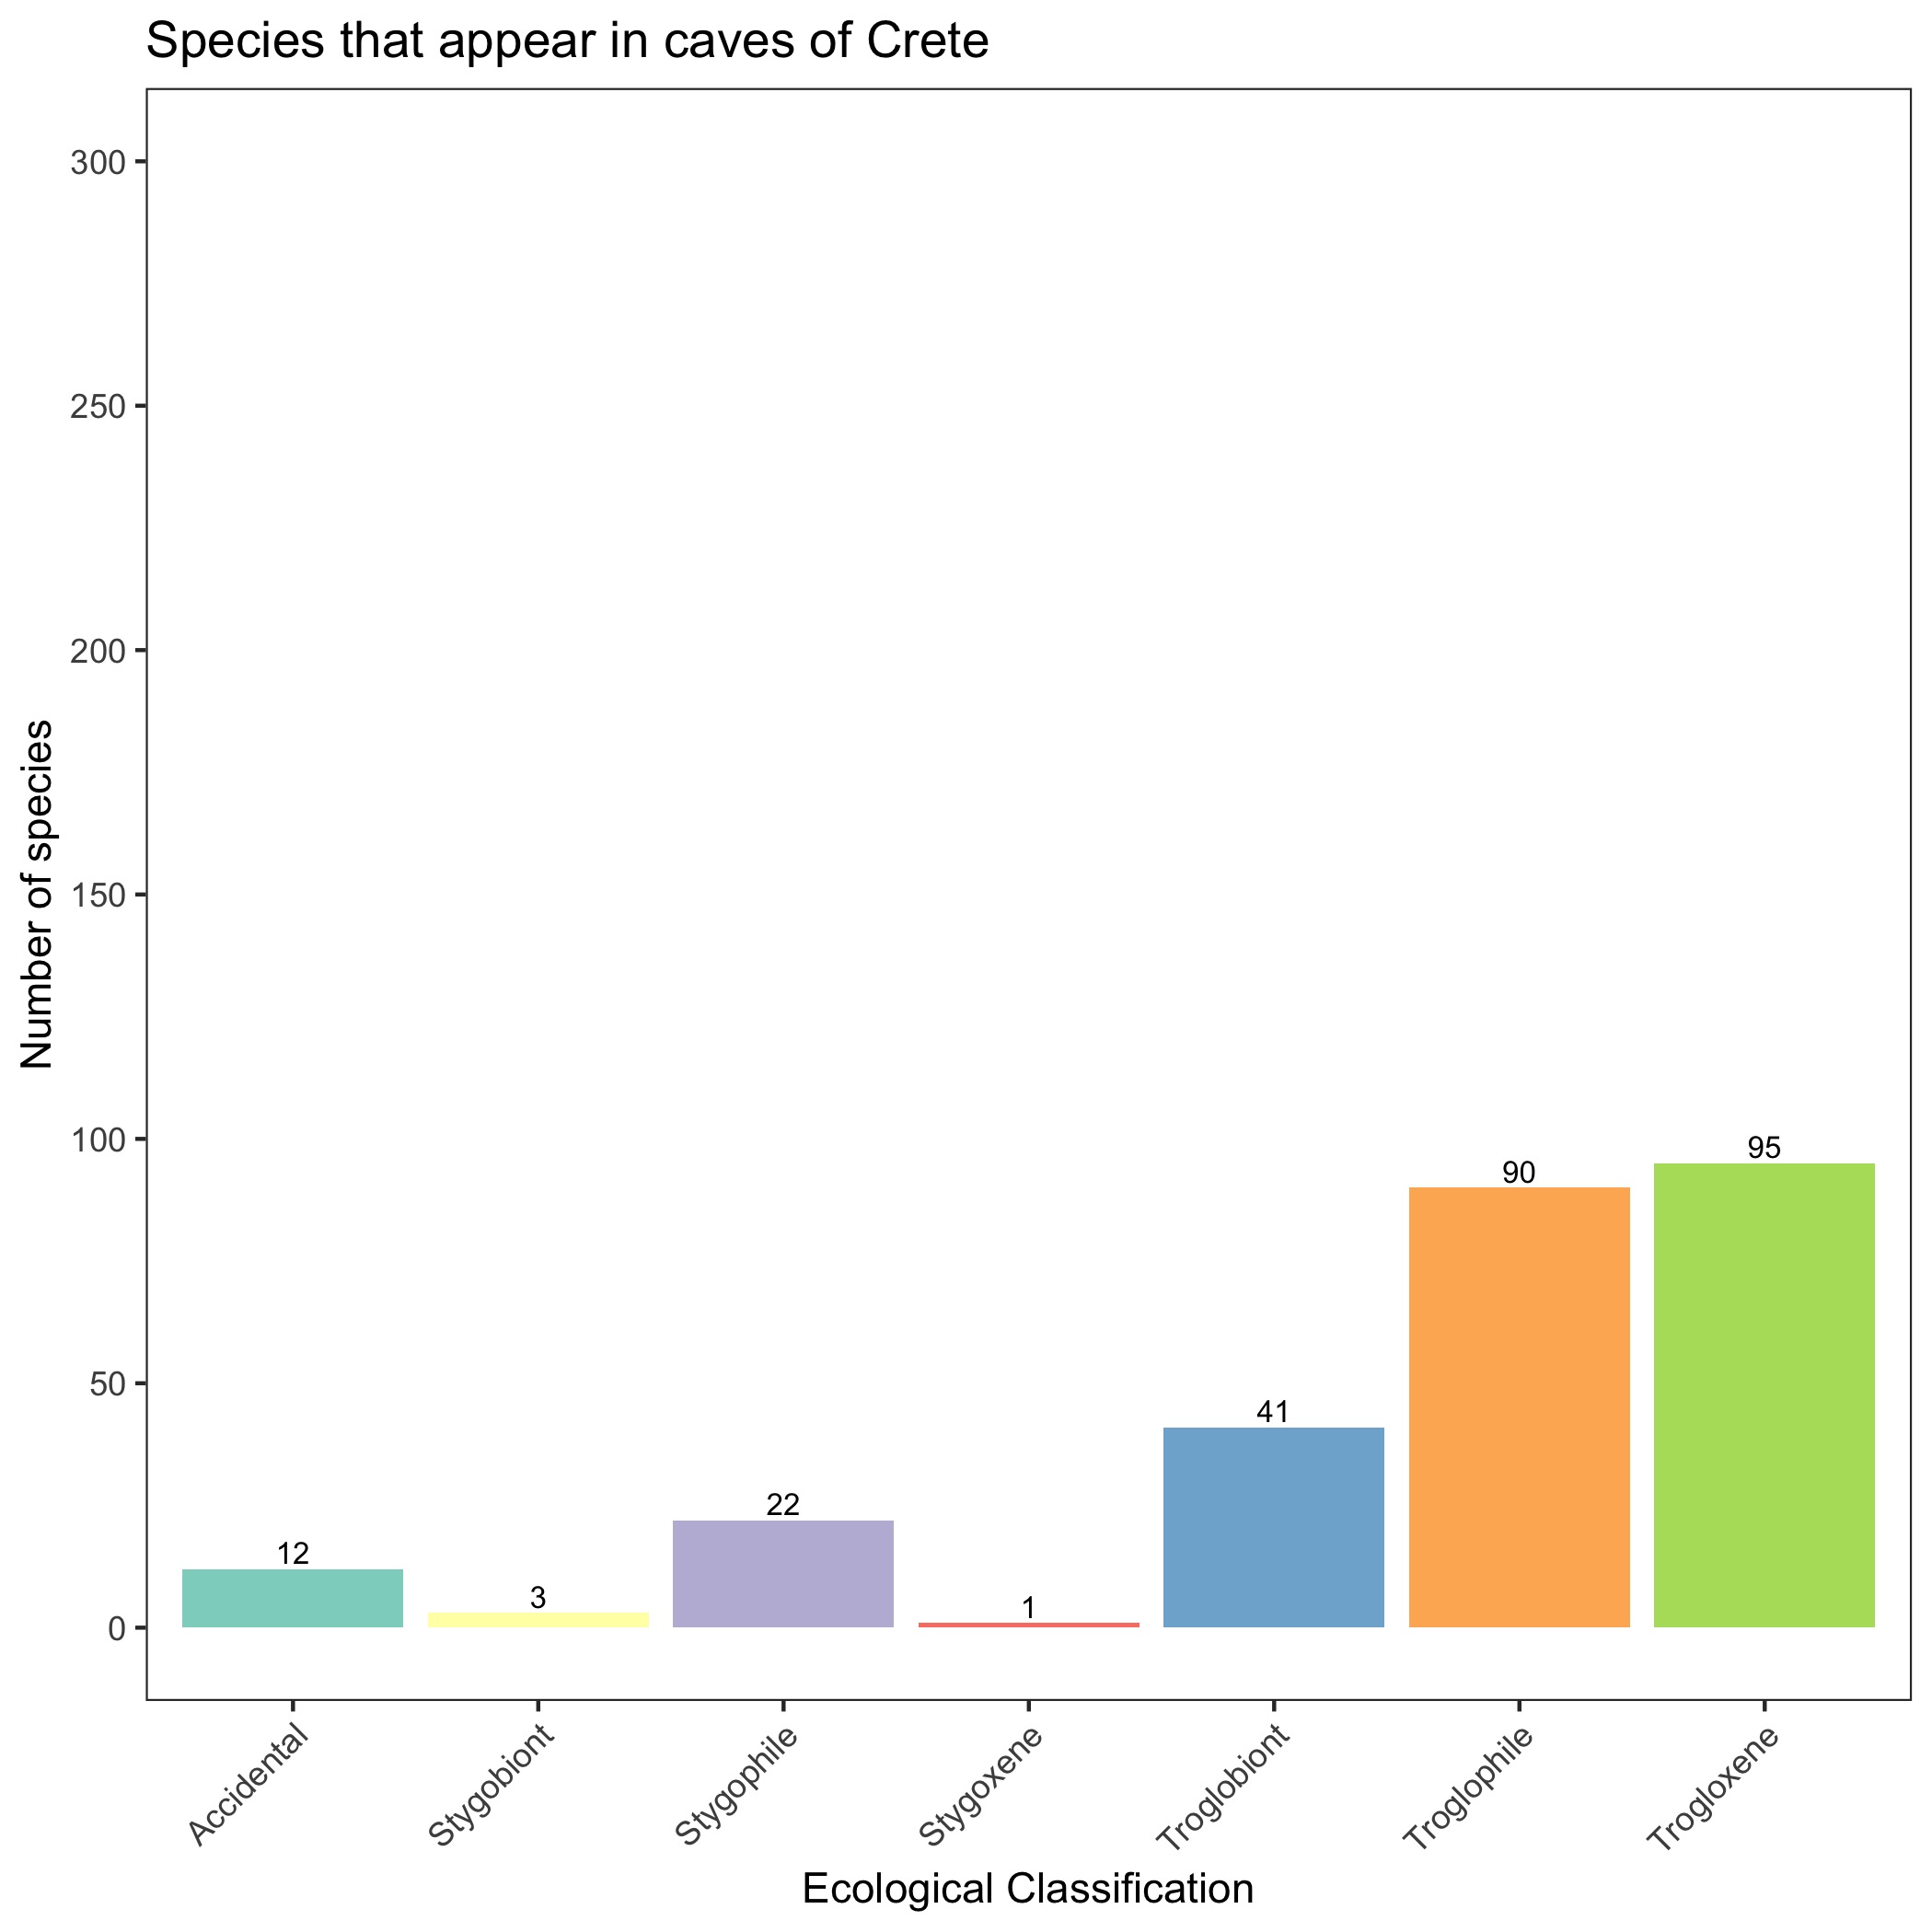 Species classification in Caves of Crete